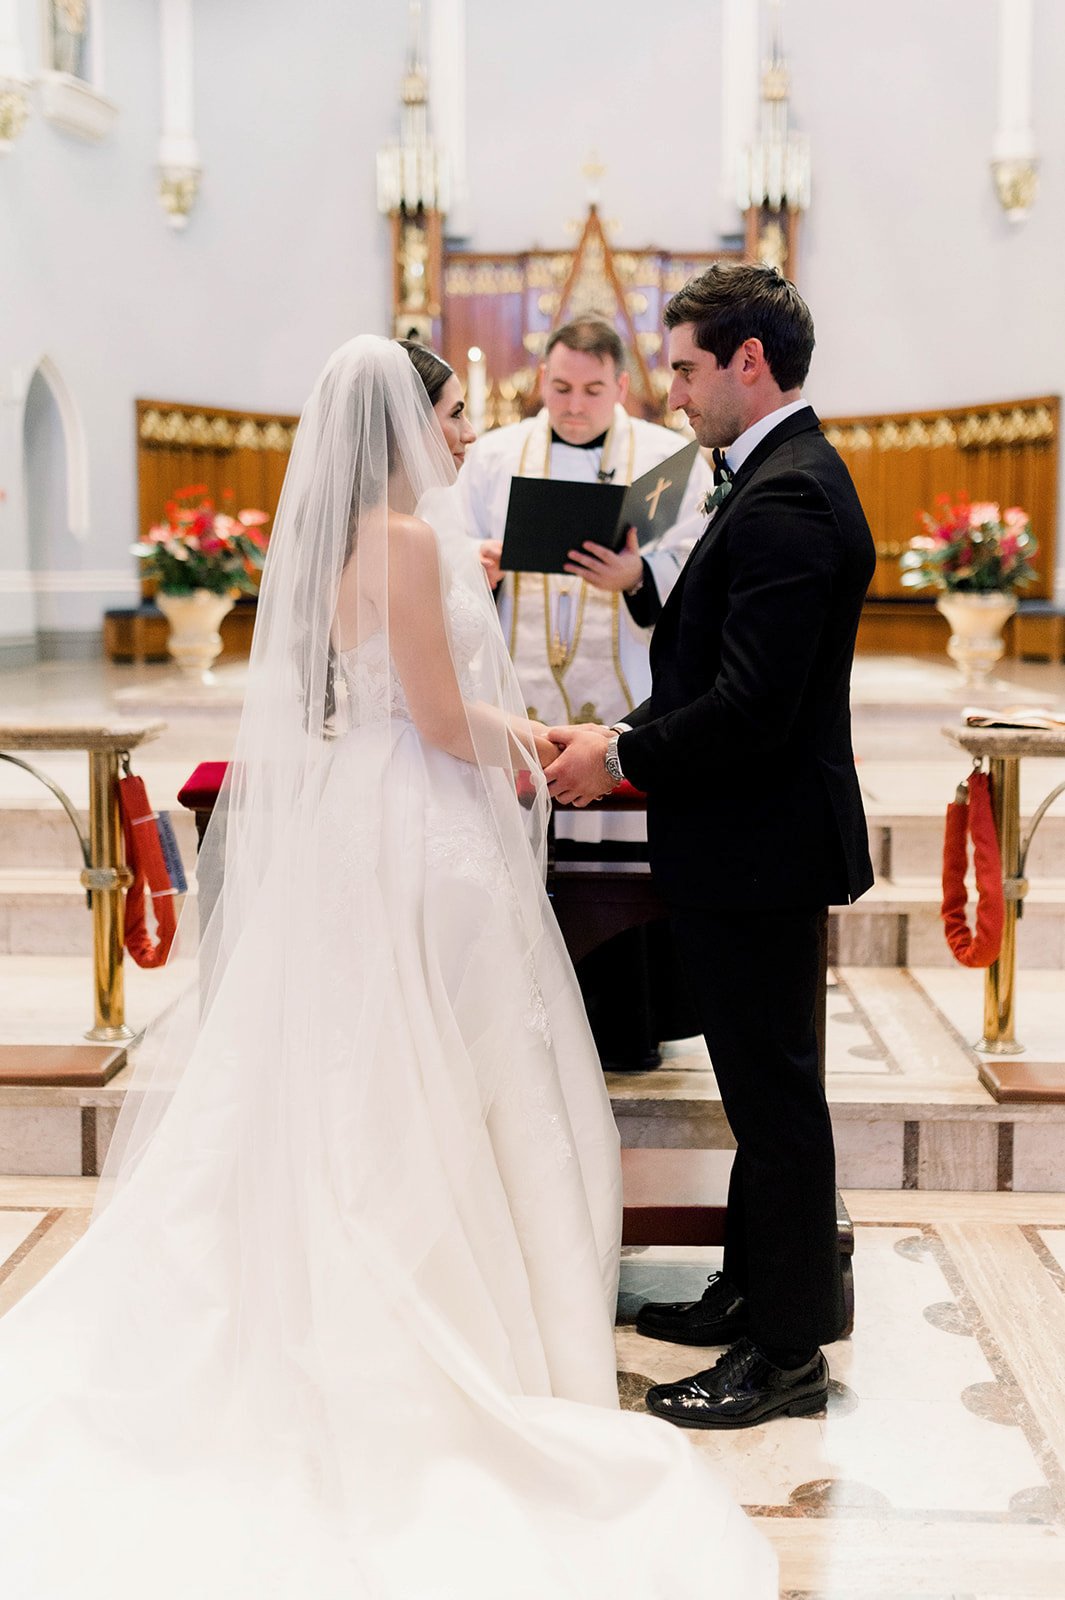 Beautiful bride and handsome groom hold hands as they exchange vows in traditional ceremony in a catholic church in Vancouver, British Columbia.